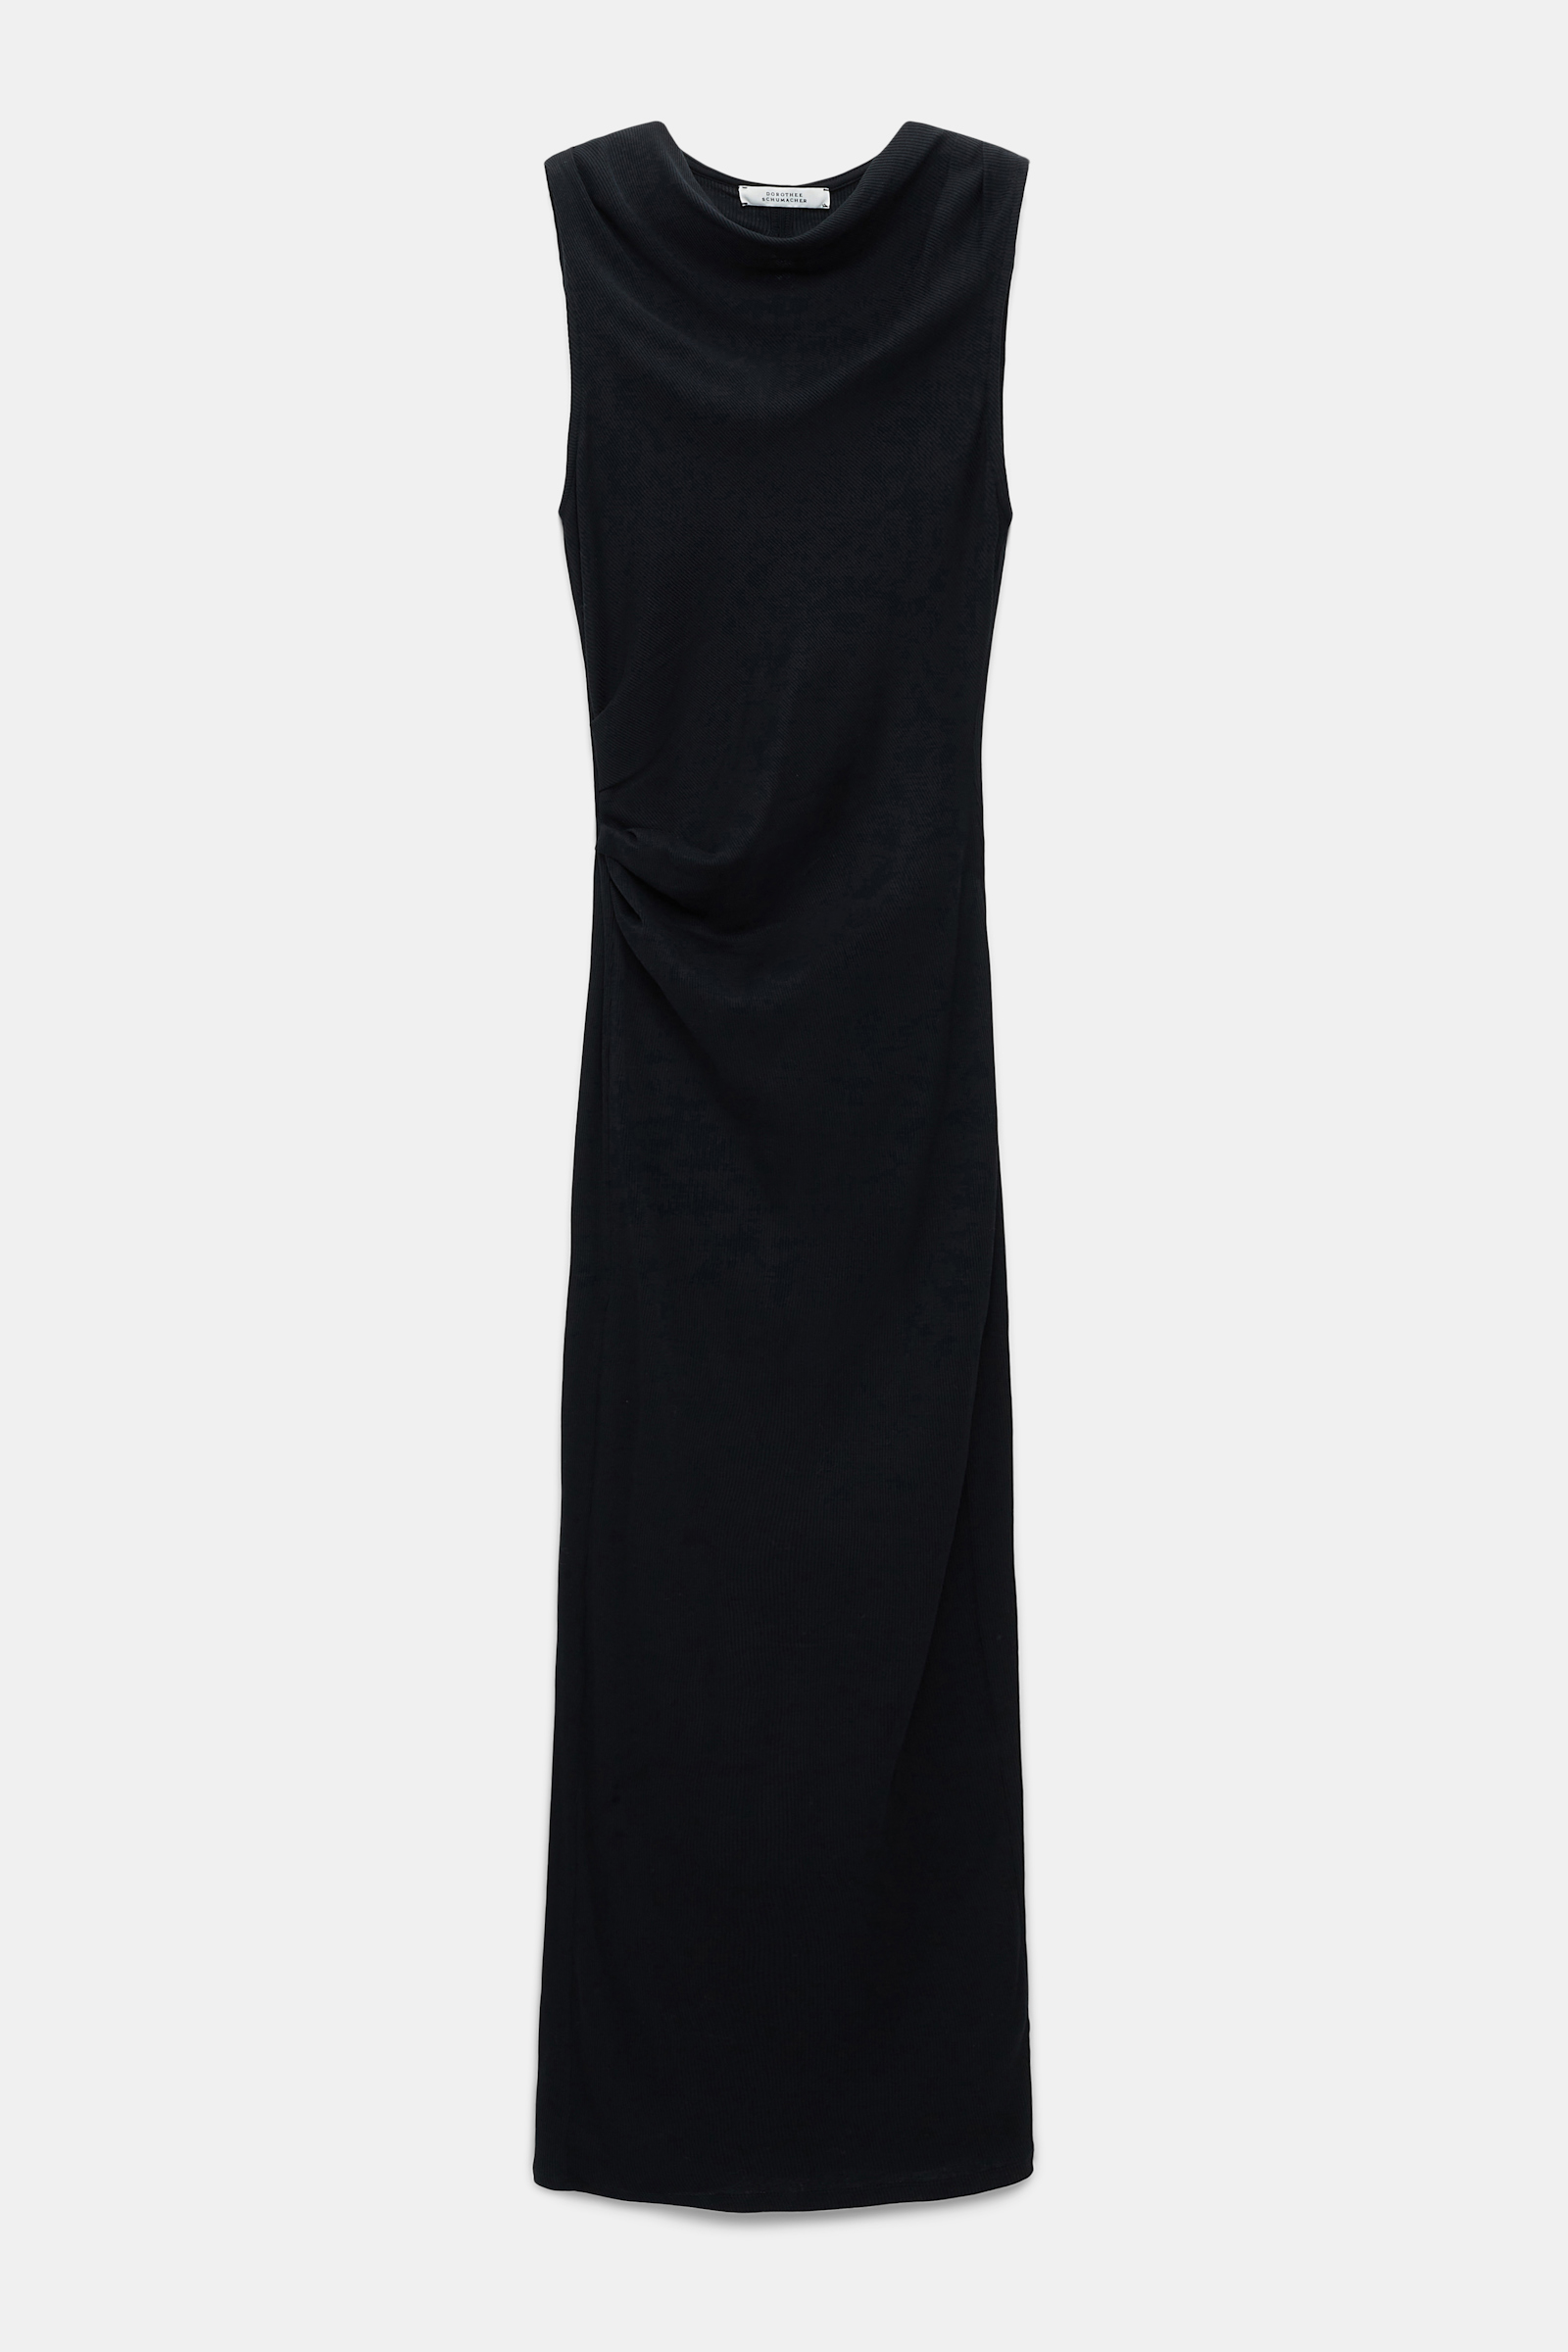 Dorothee Schumacher Ribbed cotton jersey tube dress pure black